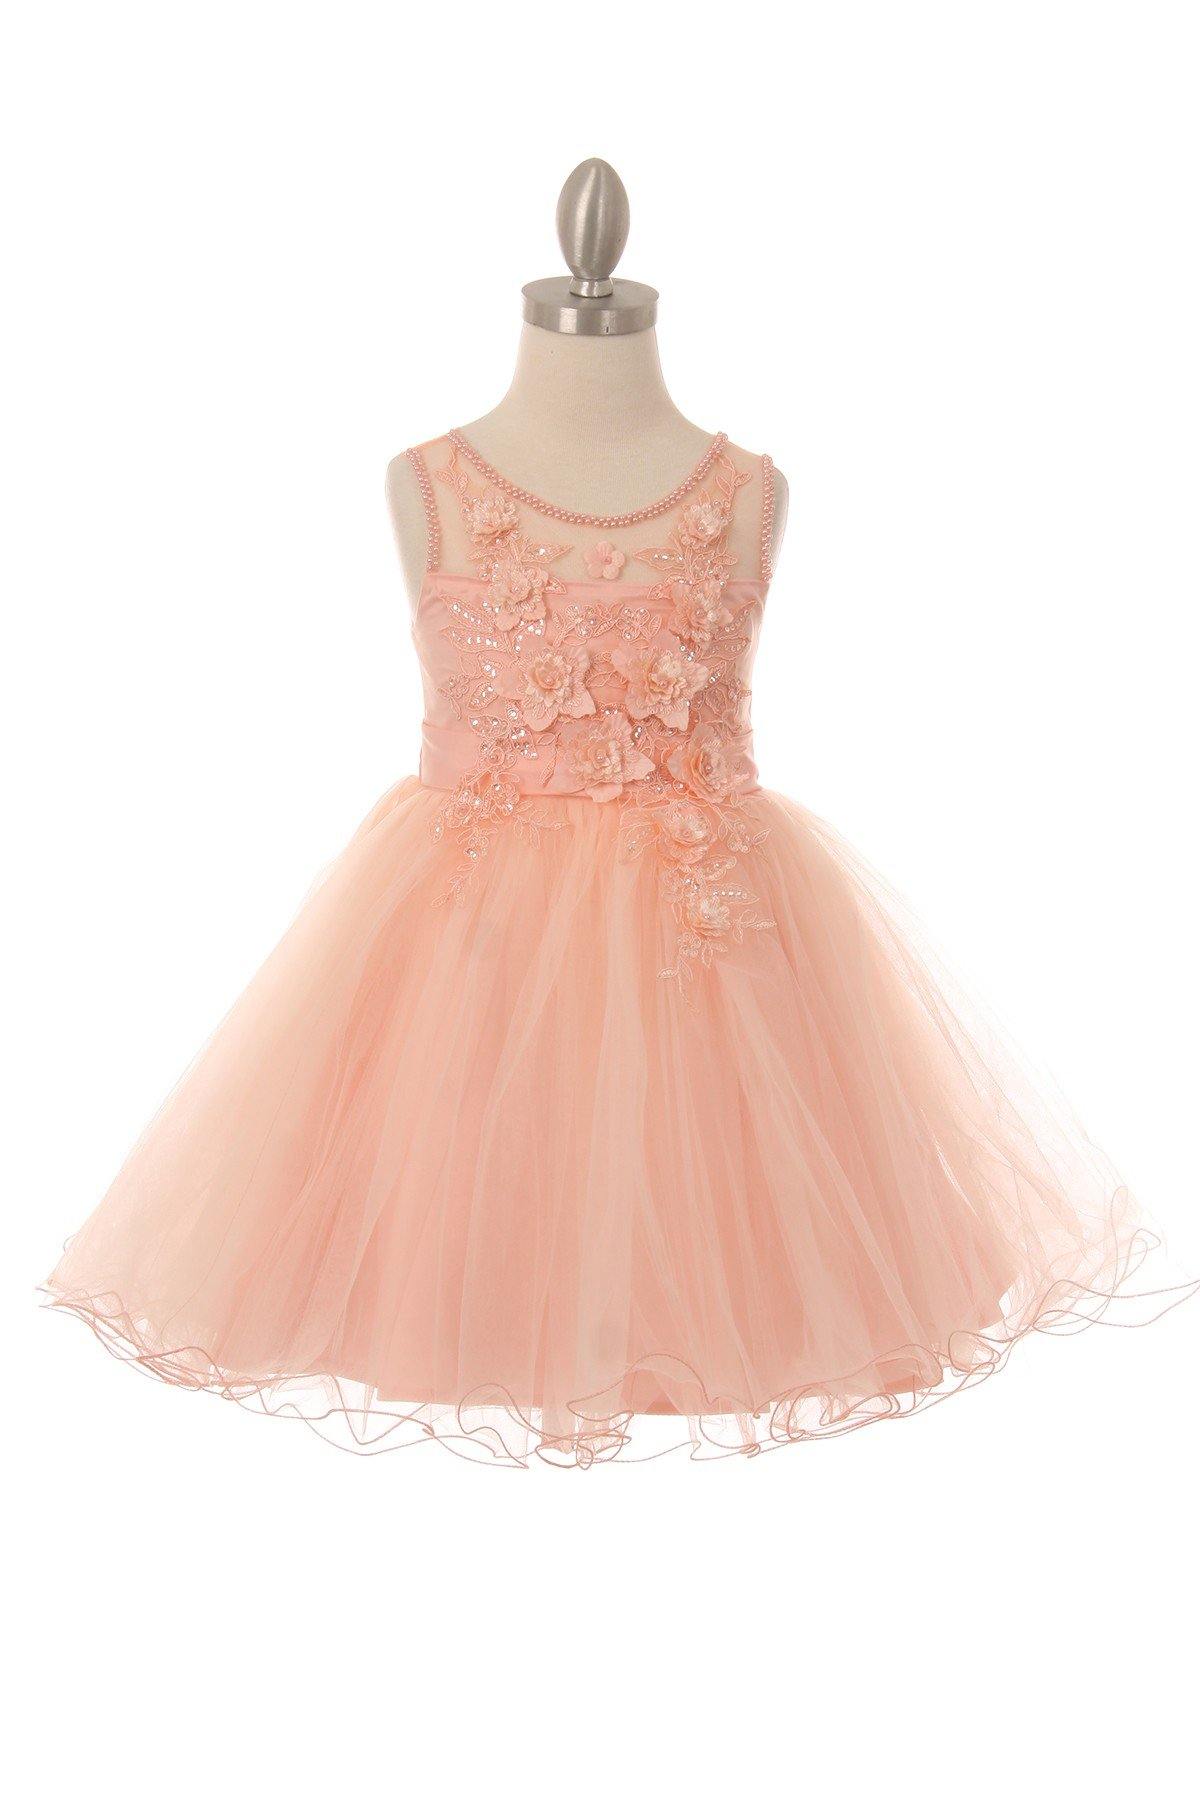 Sleeveless Embellished Short Party Flower Girls Dress - The Dress Outlet Cinderella Couture